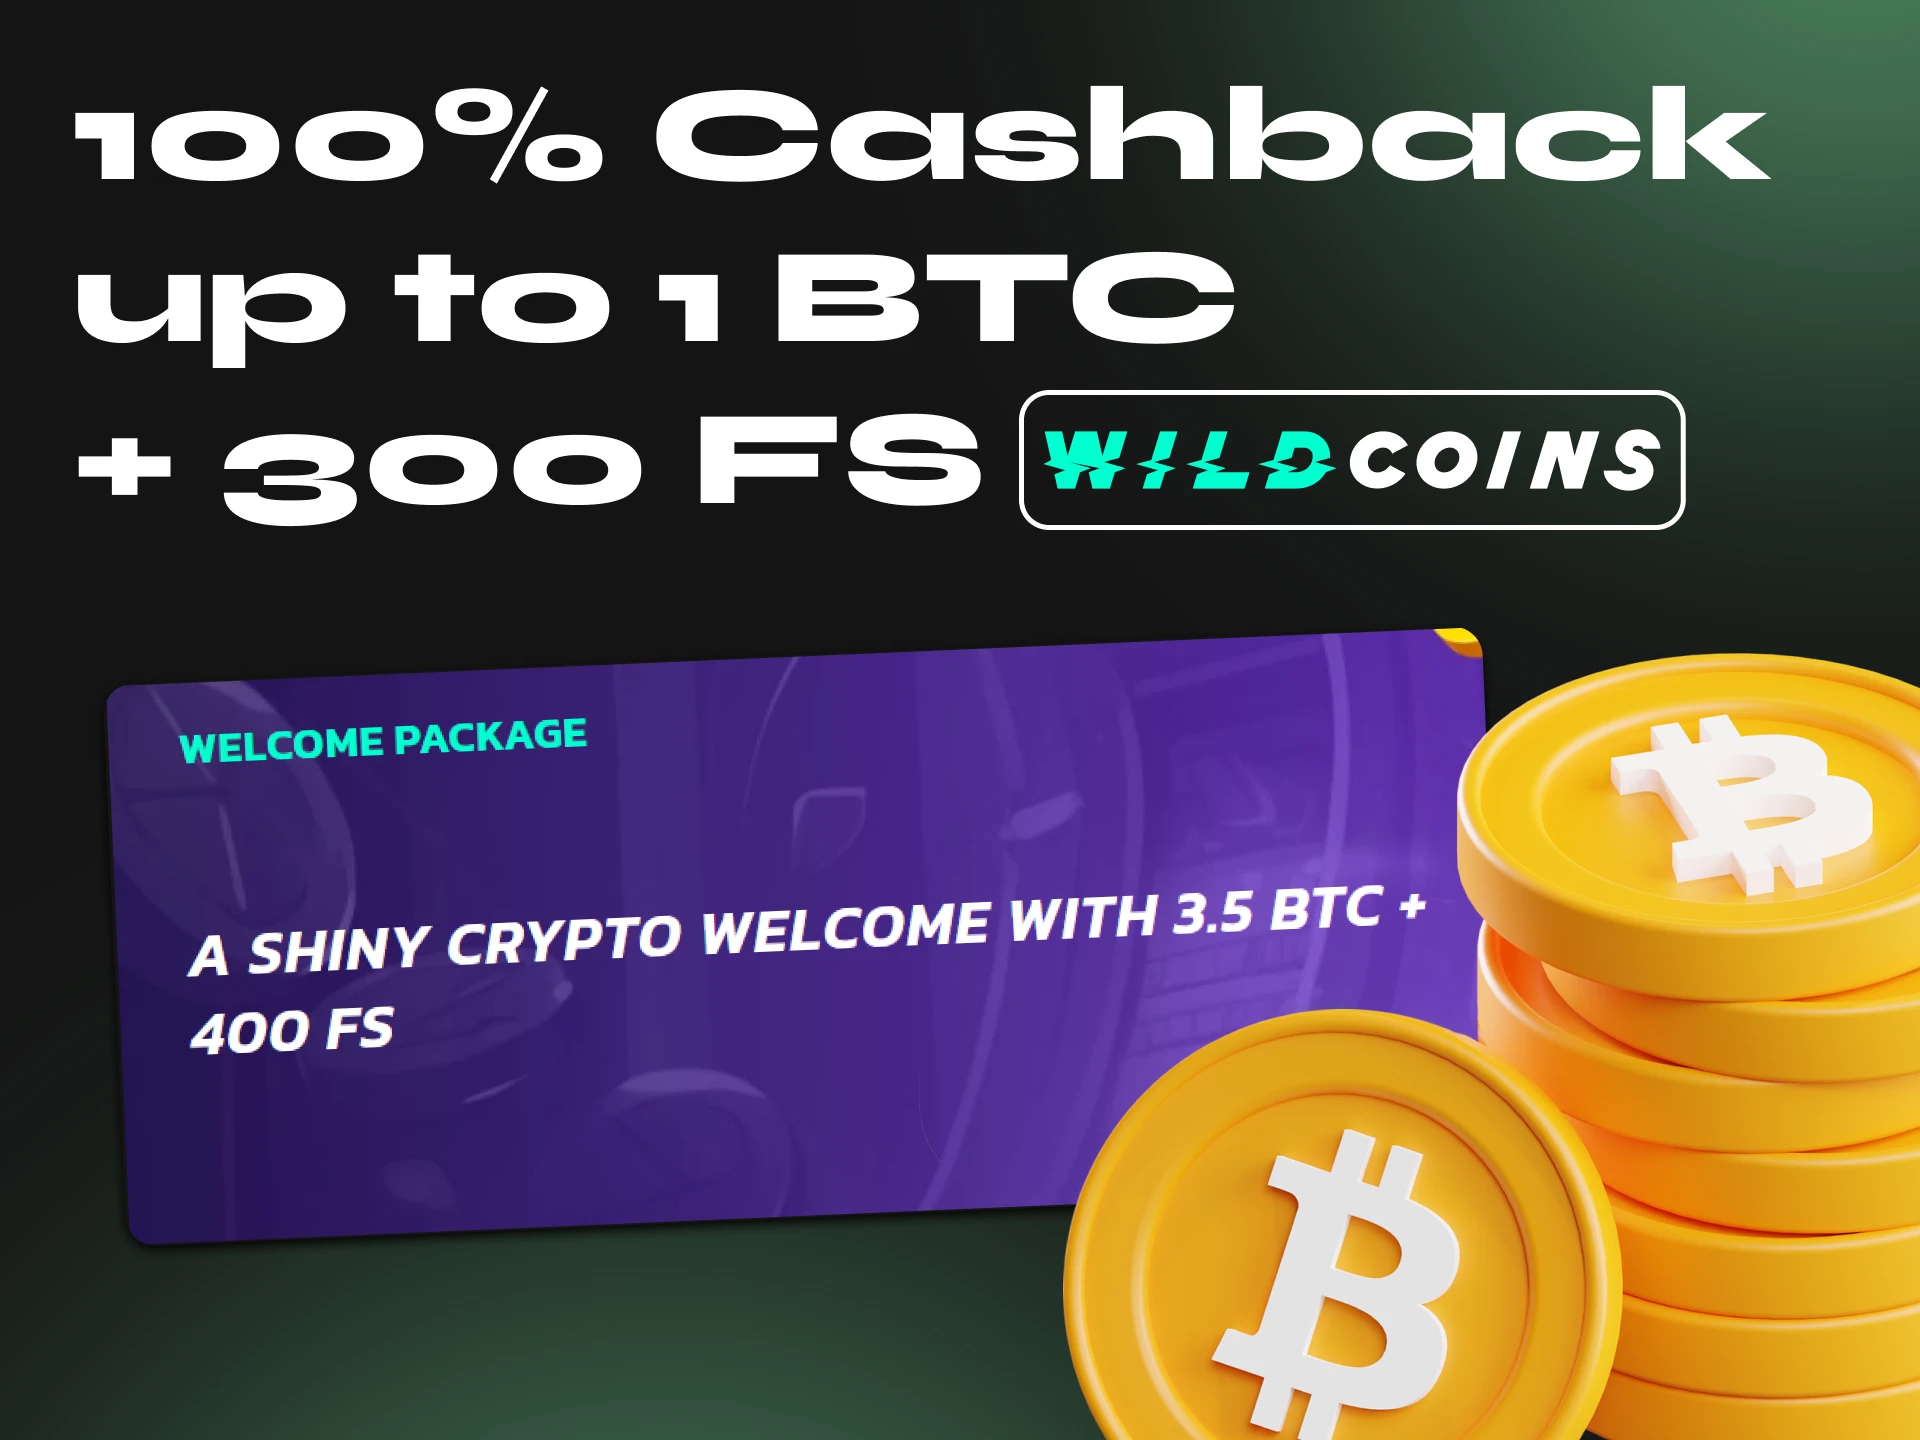 Wildcoins is a good casino with a nice welcome bonus and a large poker games section.